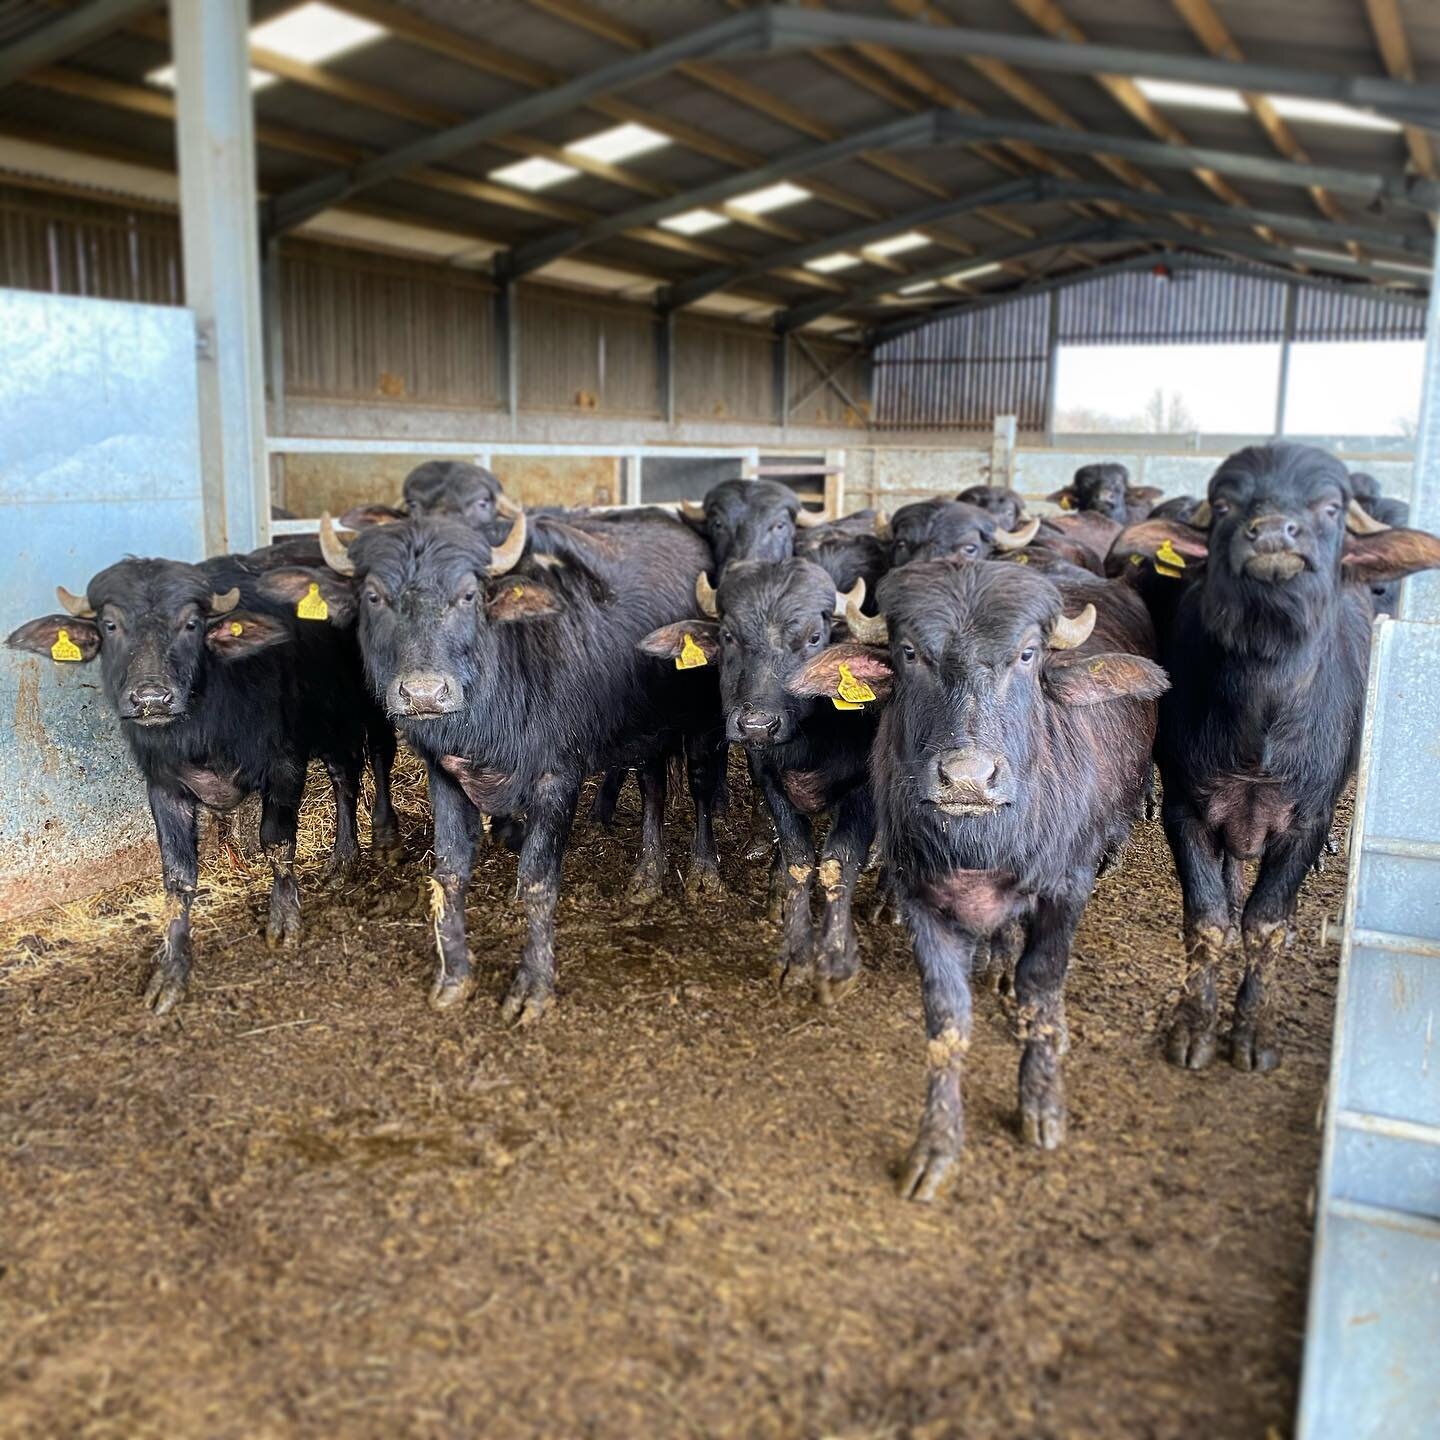 Hello Buffs! Always looking to see what&rsquo;s going on. Happy to be inside, keeping warm and out of all this cold wet weather. #buffalo #stayingwarm #waterbuffalo #winter #happy #hello #farminglife #sustainablefarming #slowfood